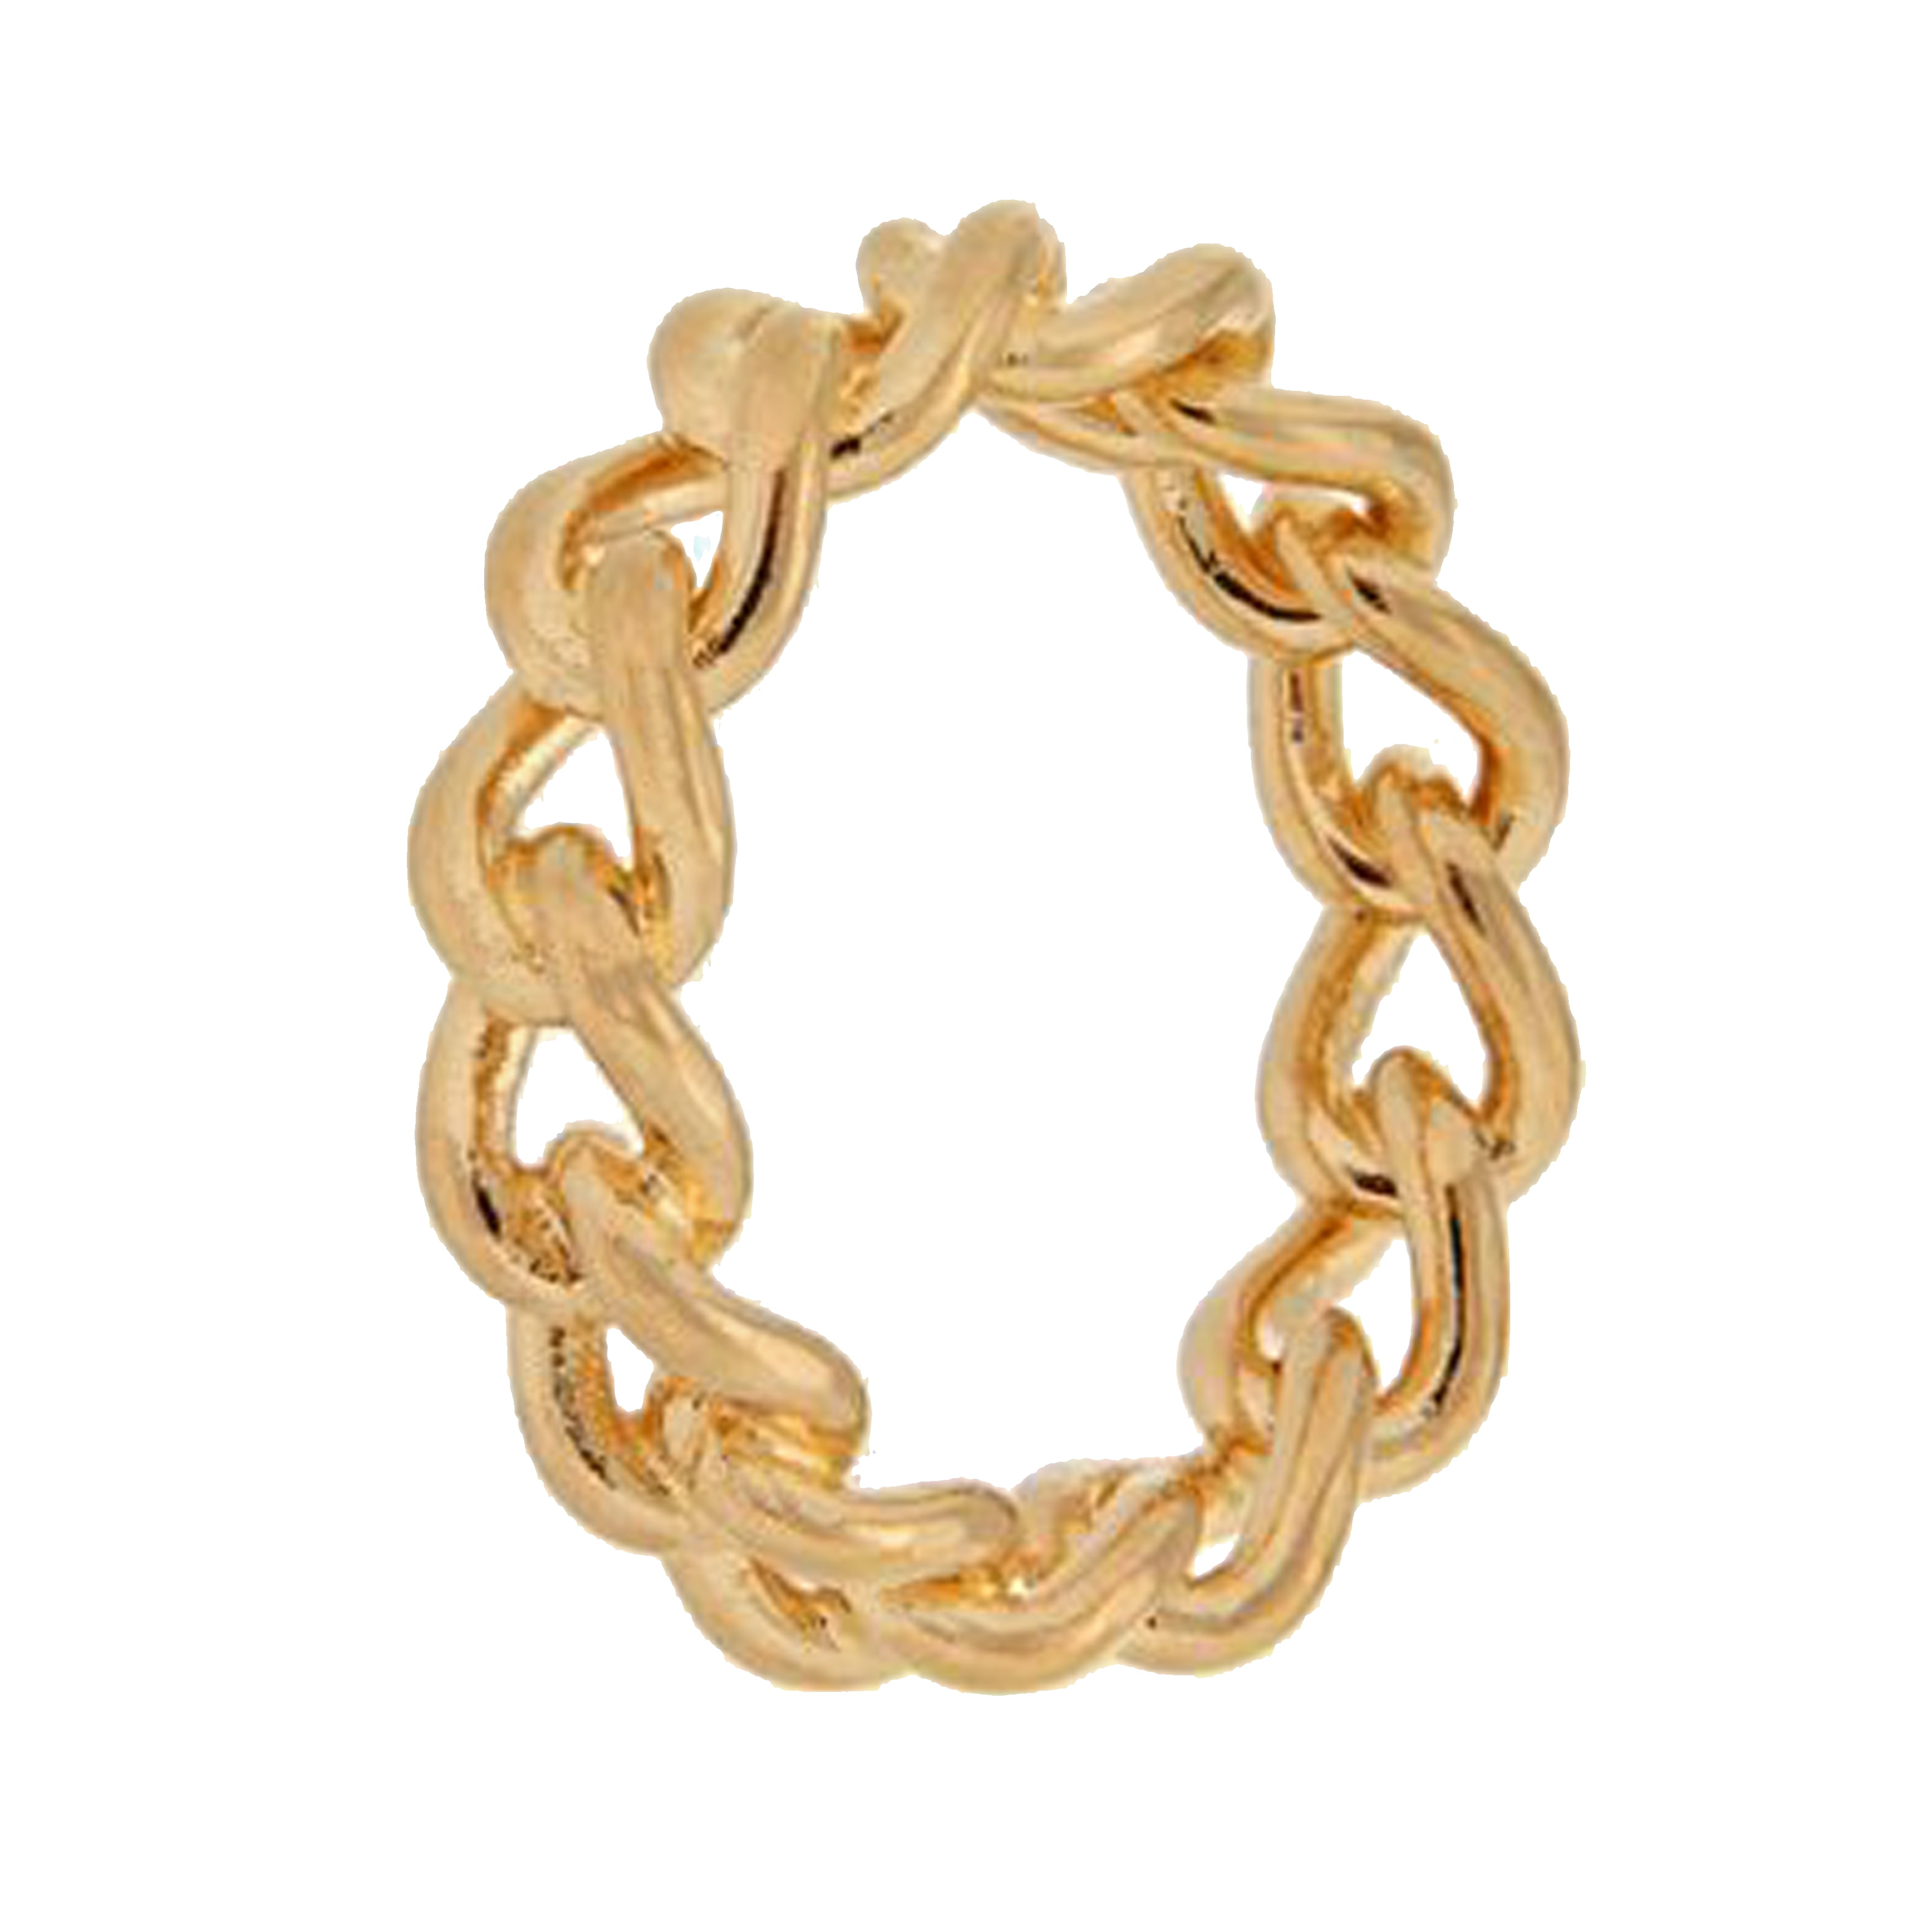 Forever Last 18 kt Gold Plated Women's Chain Link Ring | Walmart Canada